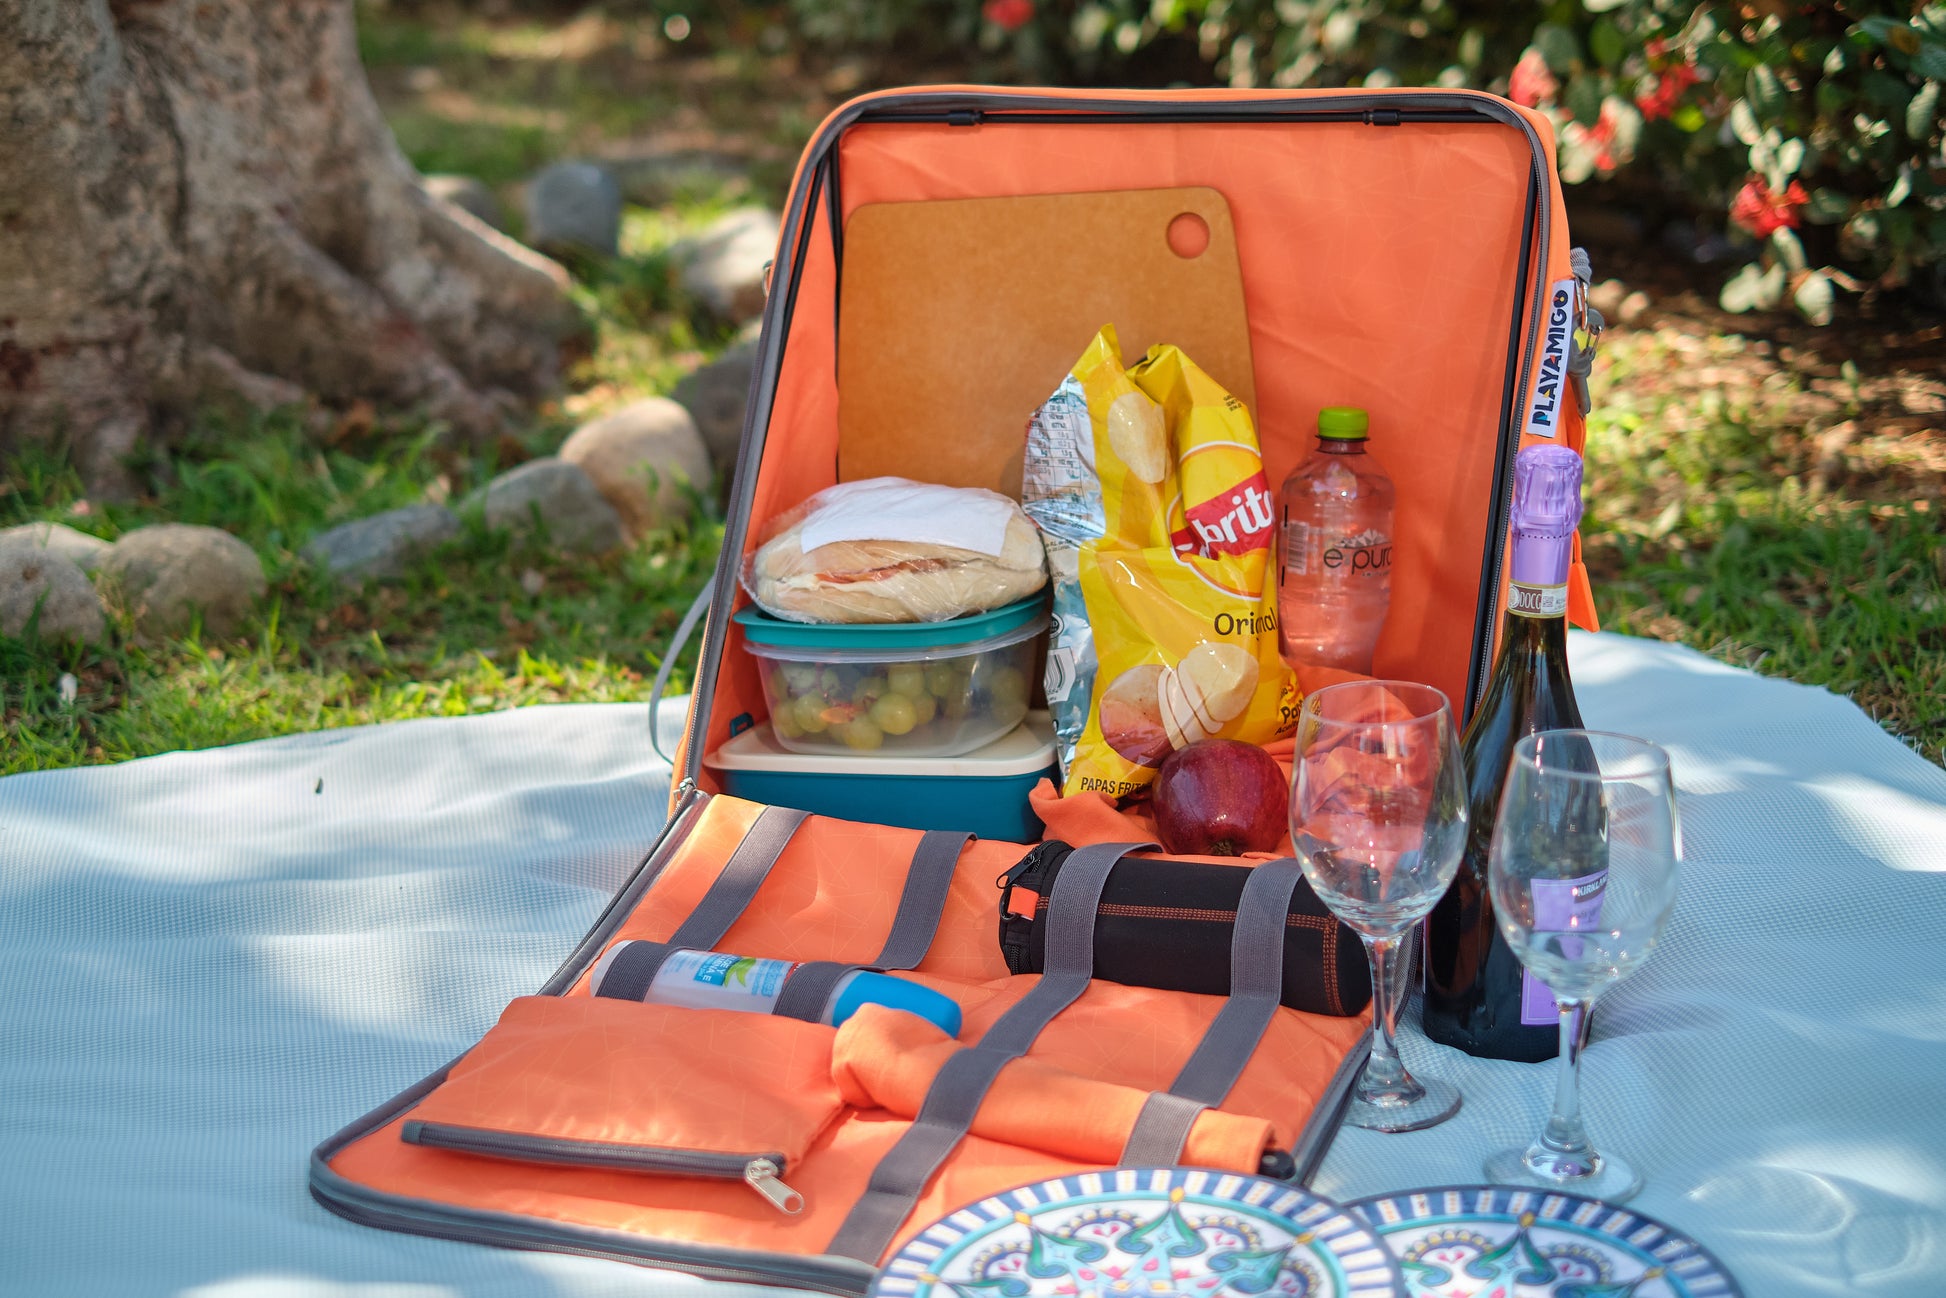 Interior carrying space of a Playamigo ground chair showing a variety of picnic supplies.